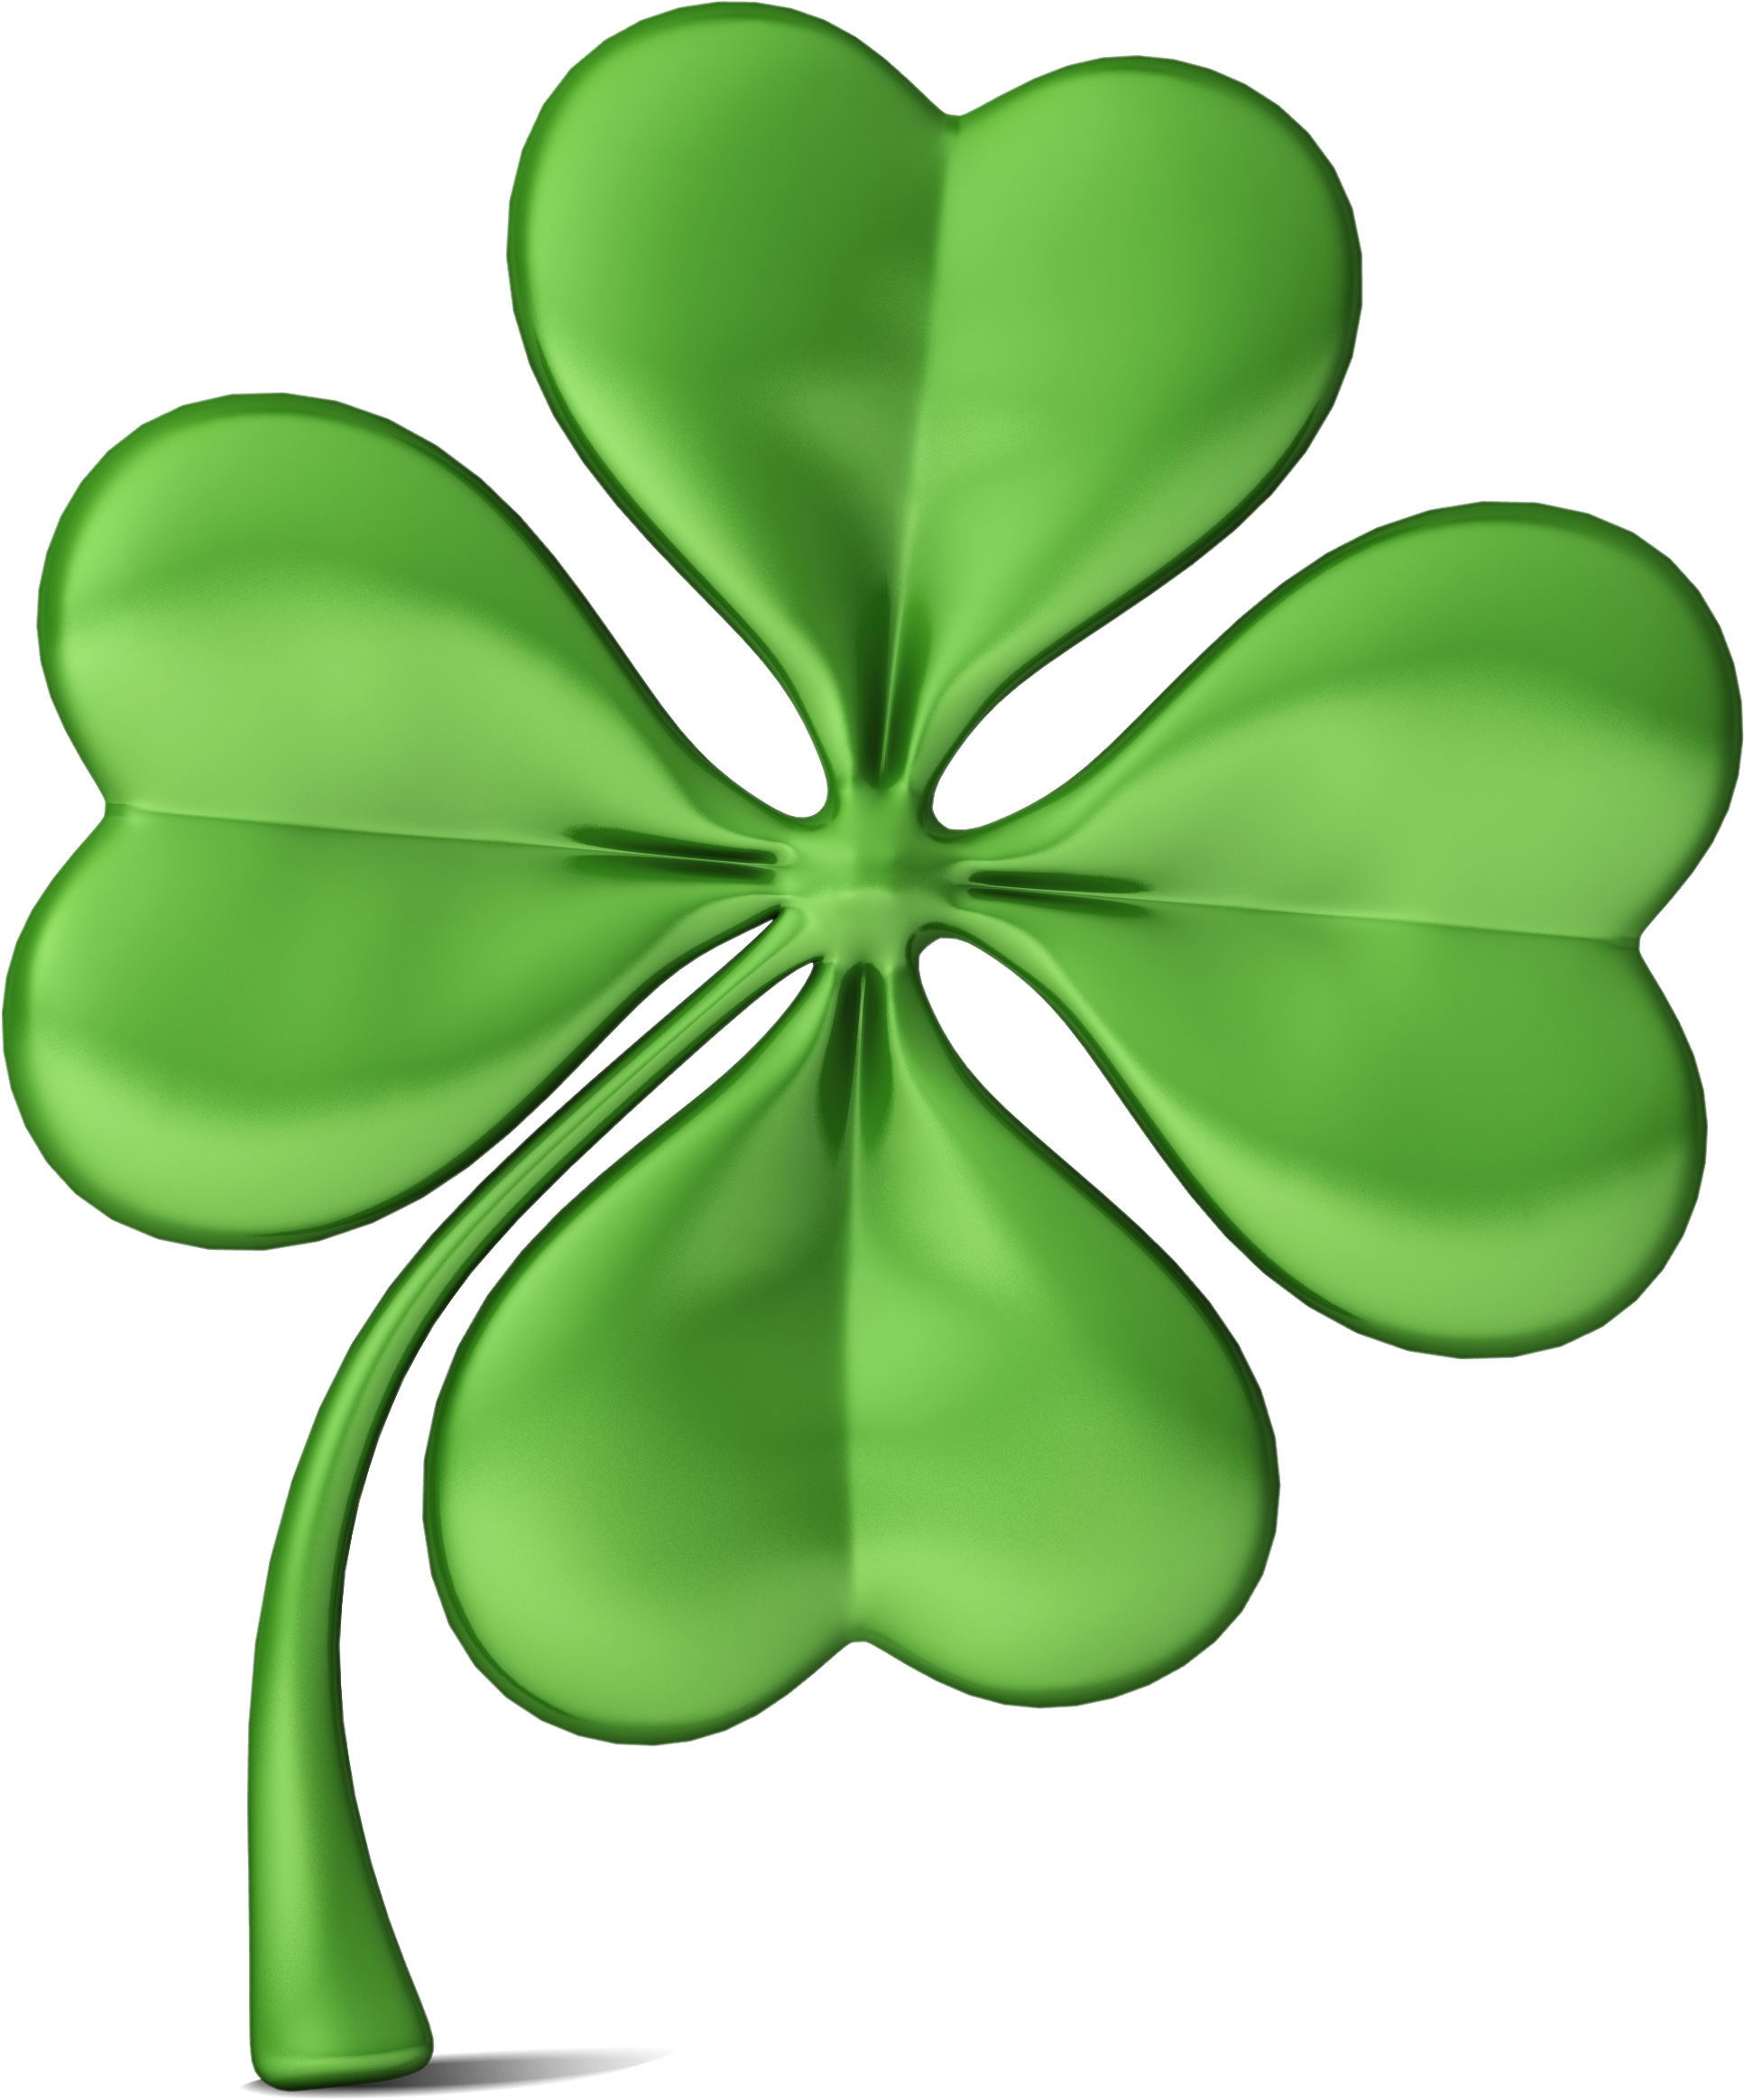 Clover Png - Clover Png (2500x2500)